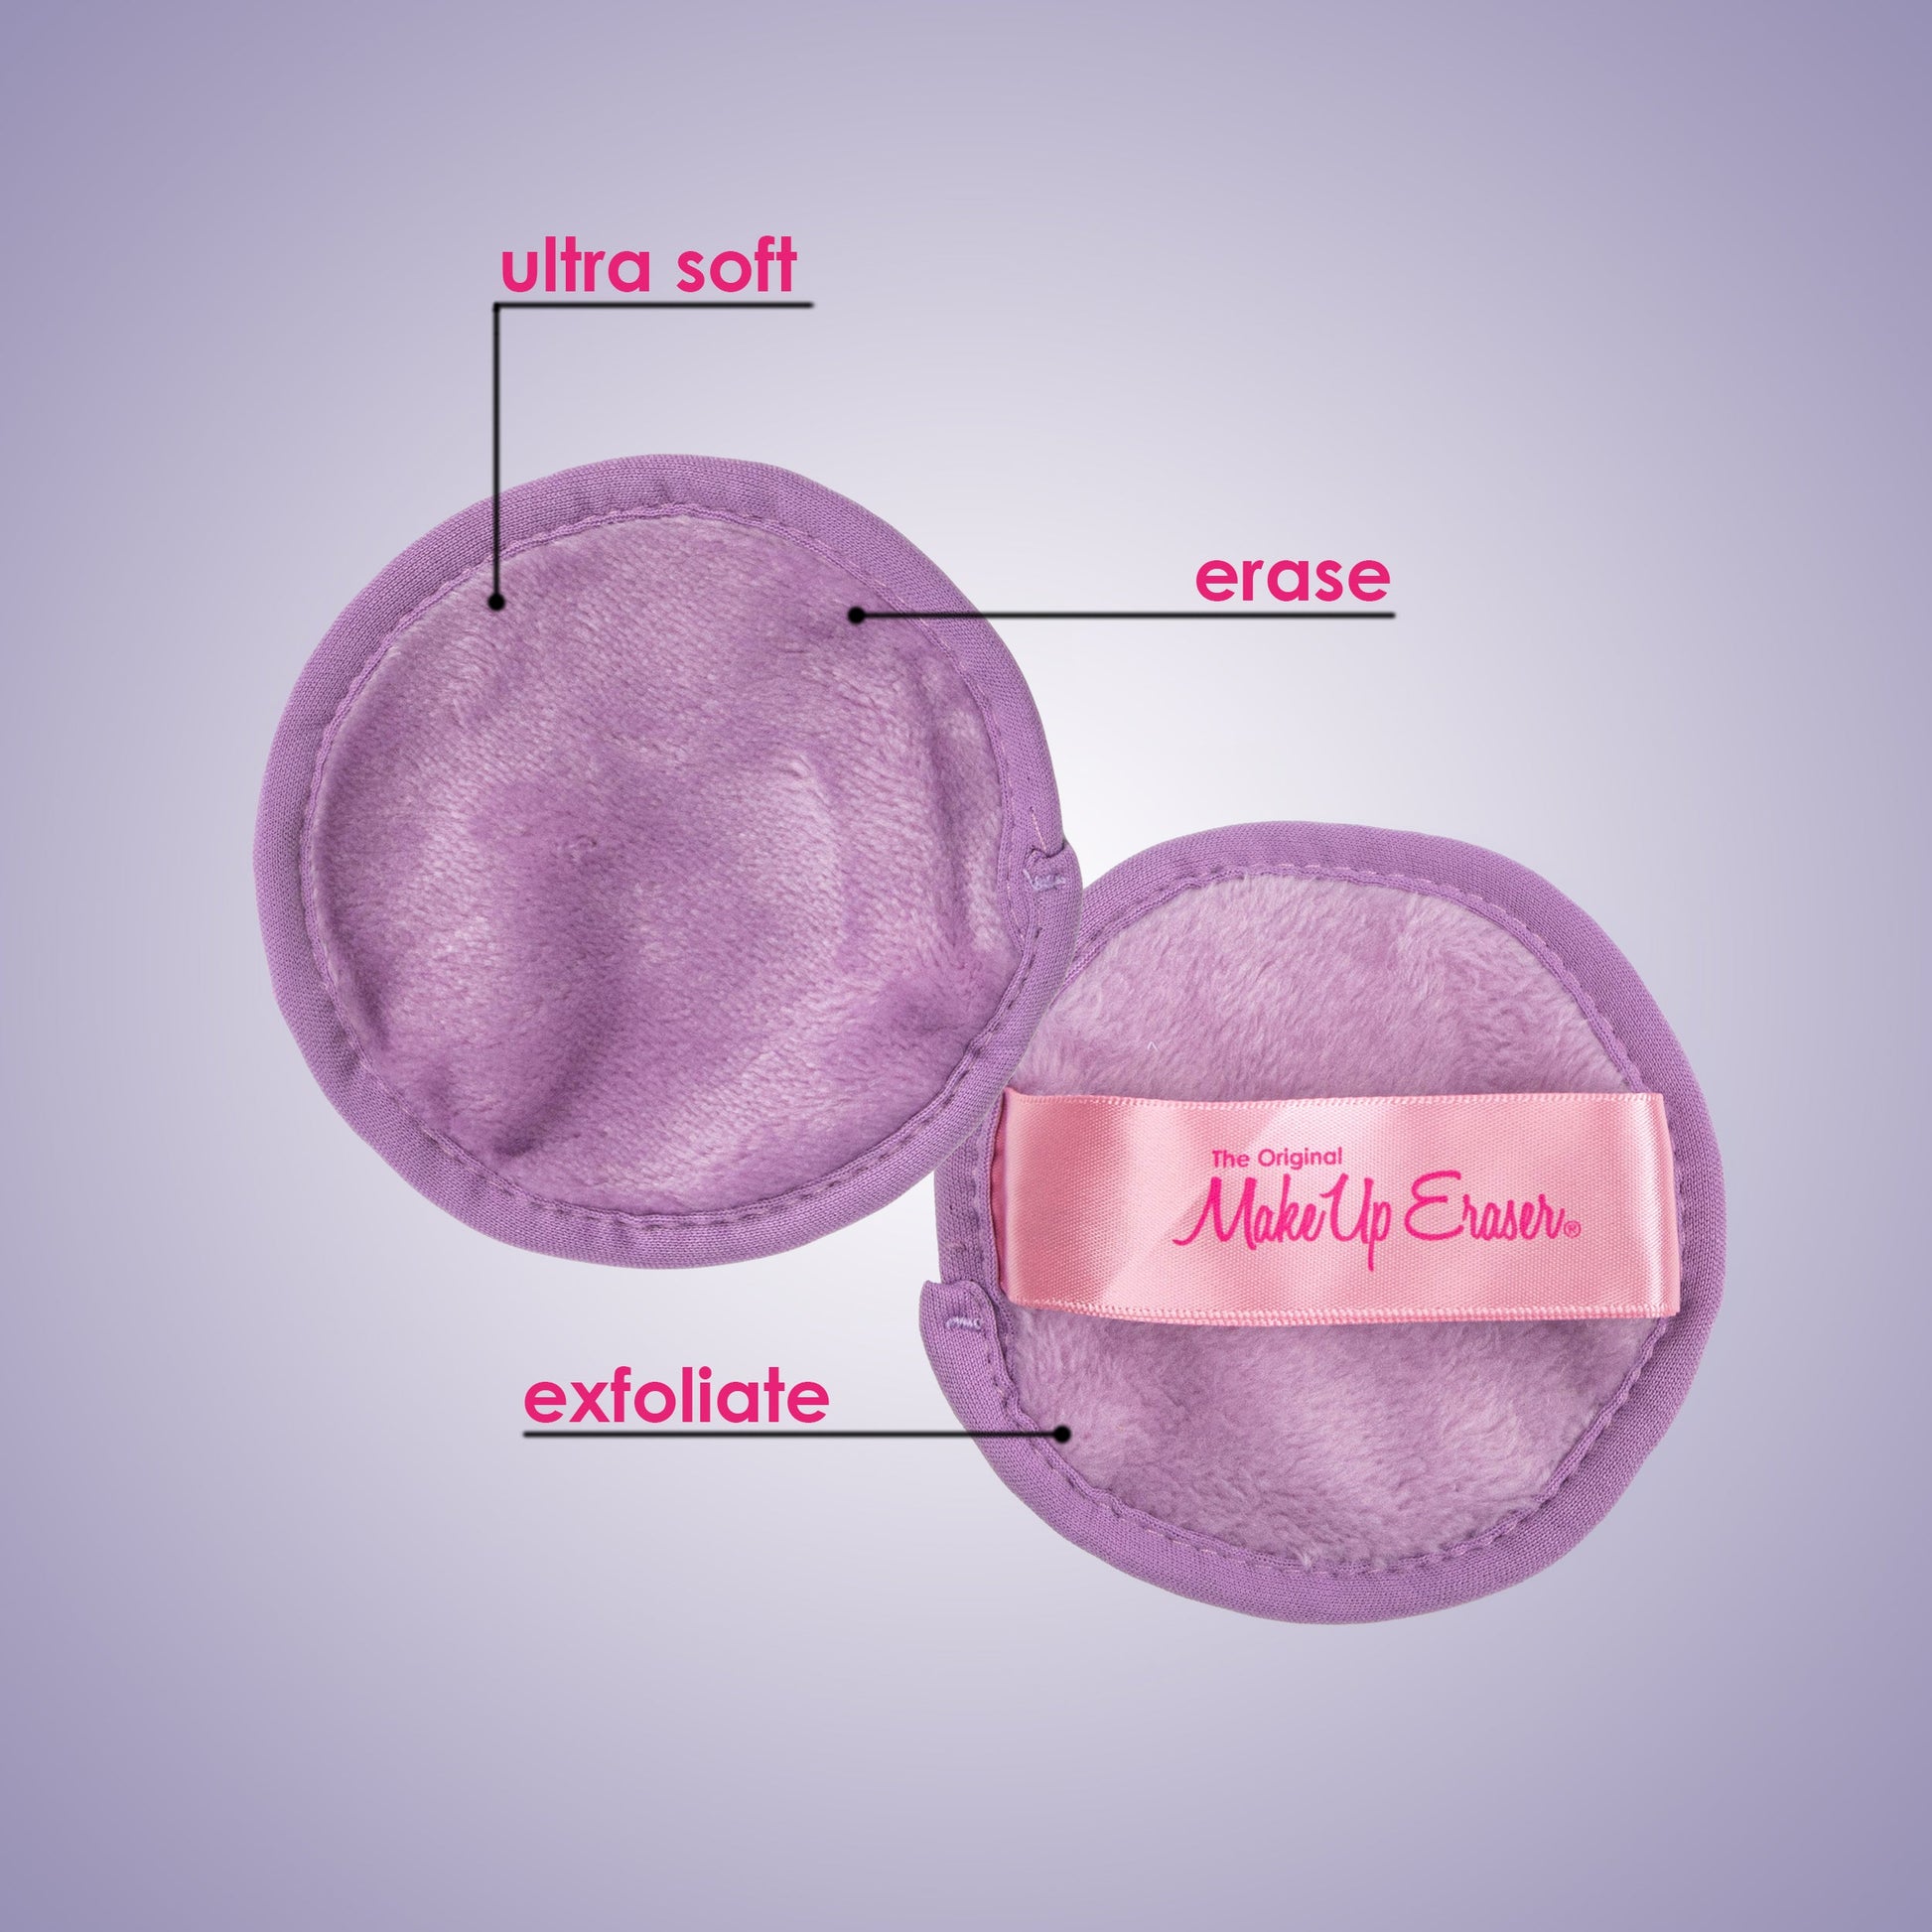 Front and back of Sweet Treat 7-Day Set MakeUp Eraser cloth. The front short fiber side is labeled as erase, and the back long fiber side is labeled as exfoliate.